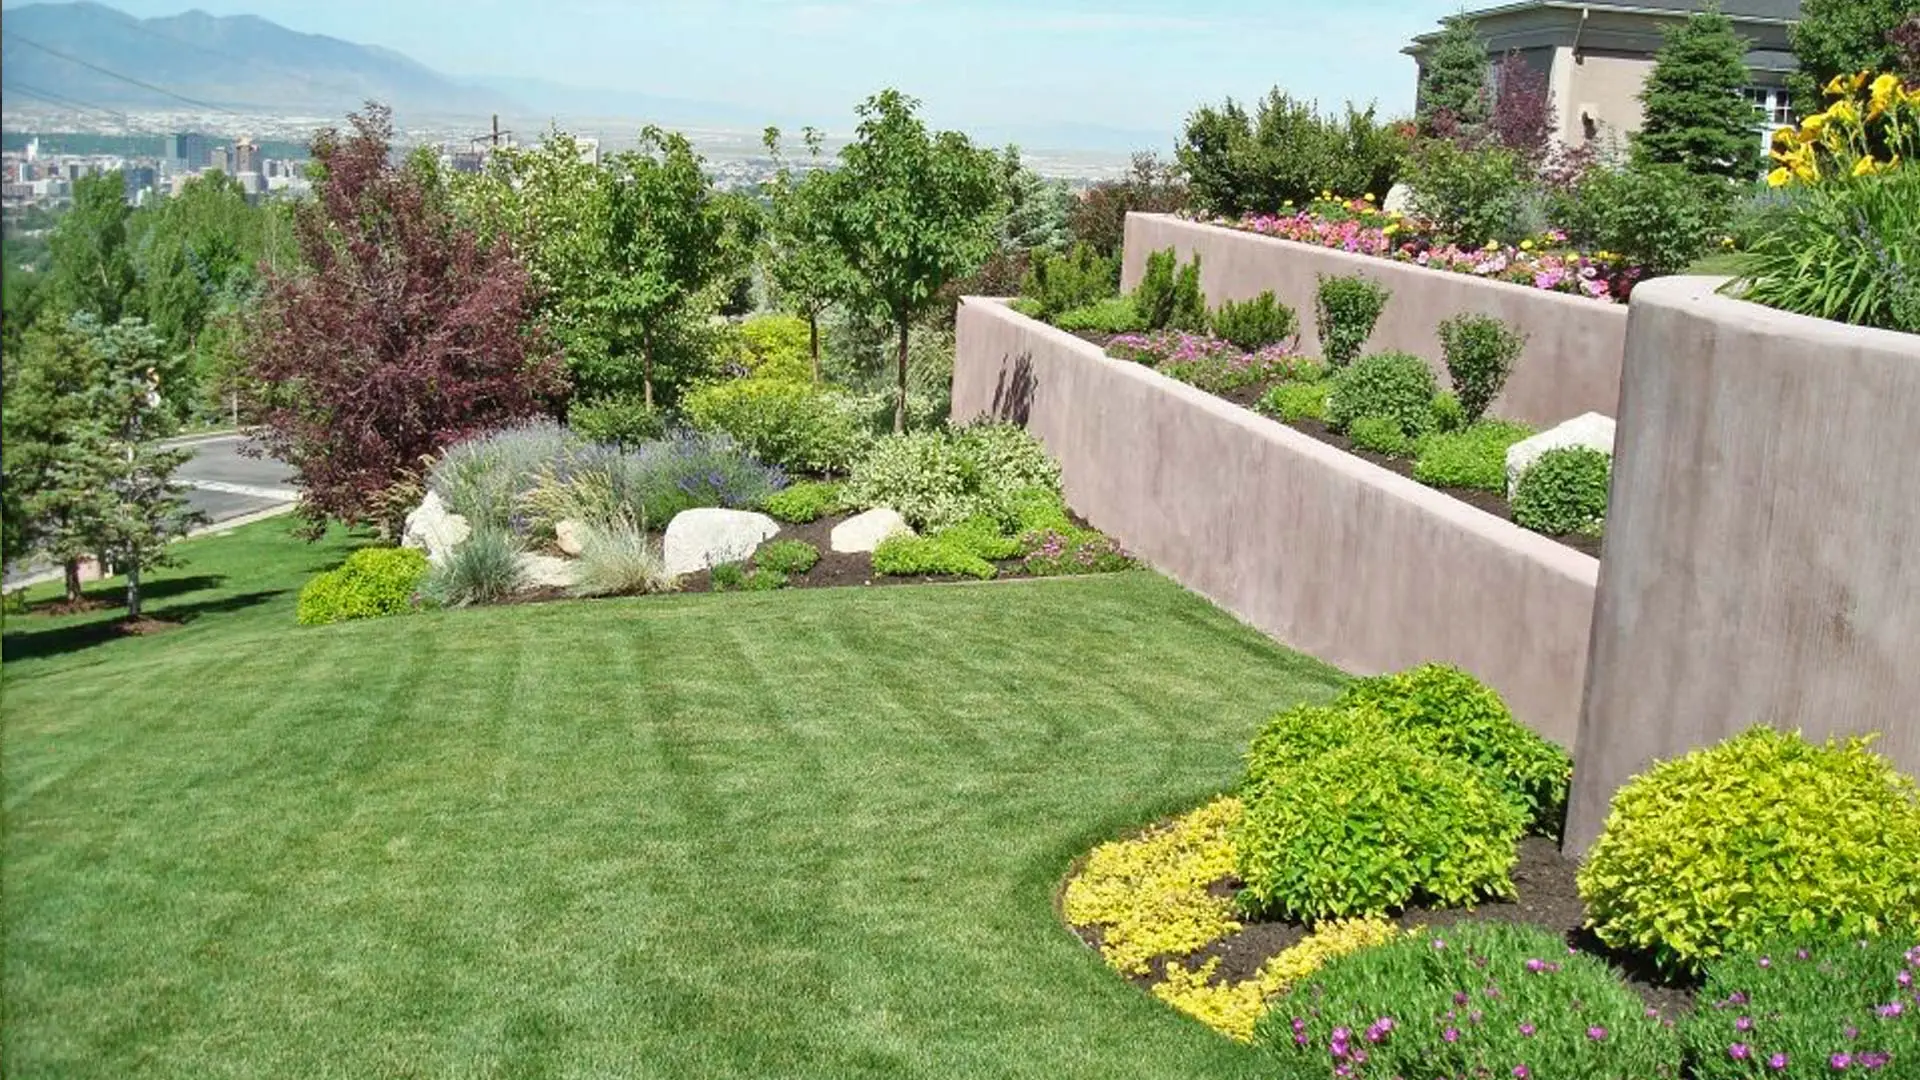 Lawn mowing stripes and meticulously maintained landscaping at a property located in Draper. 